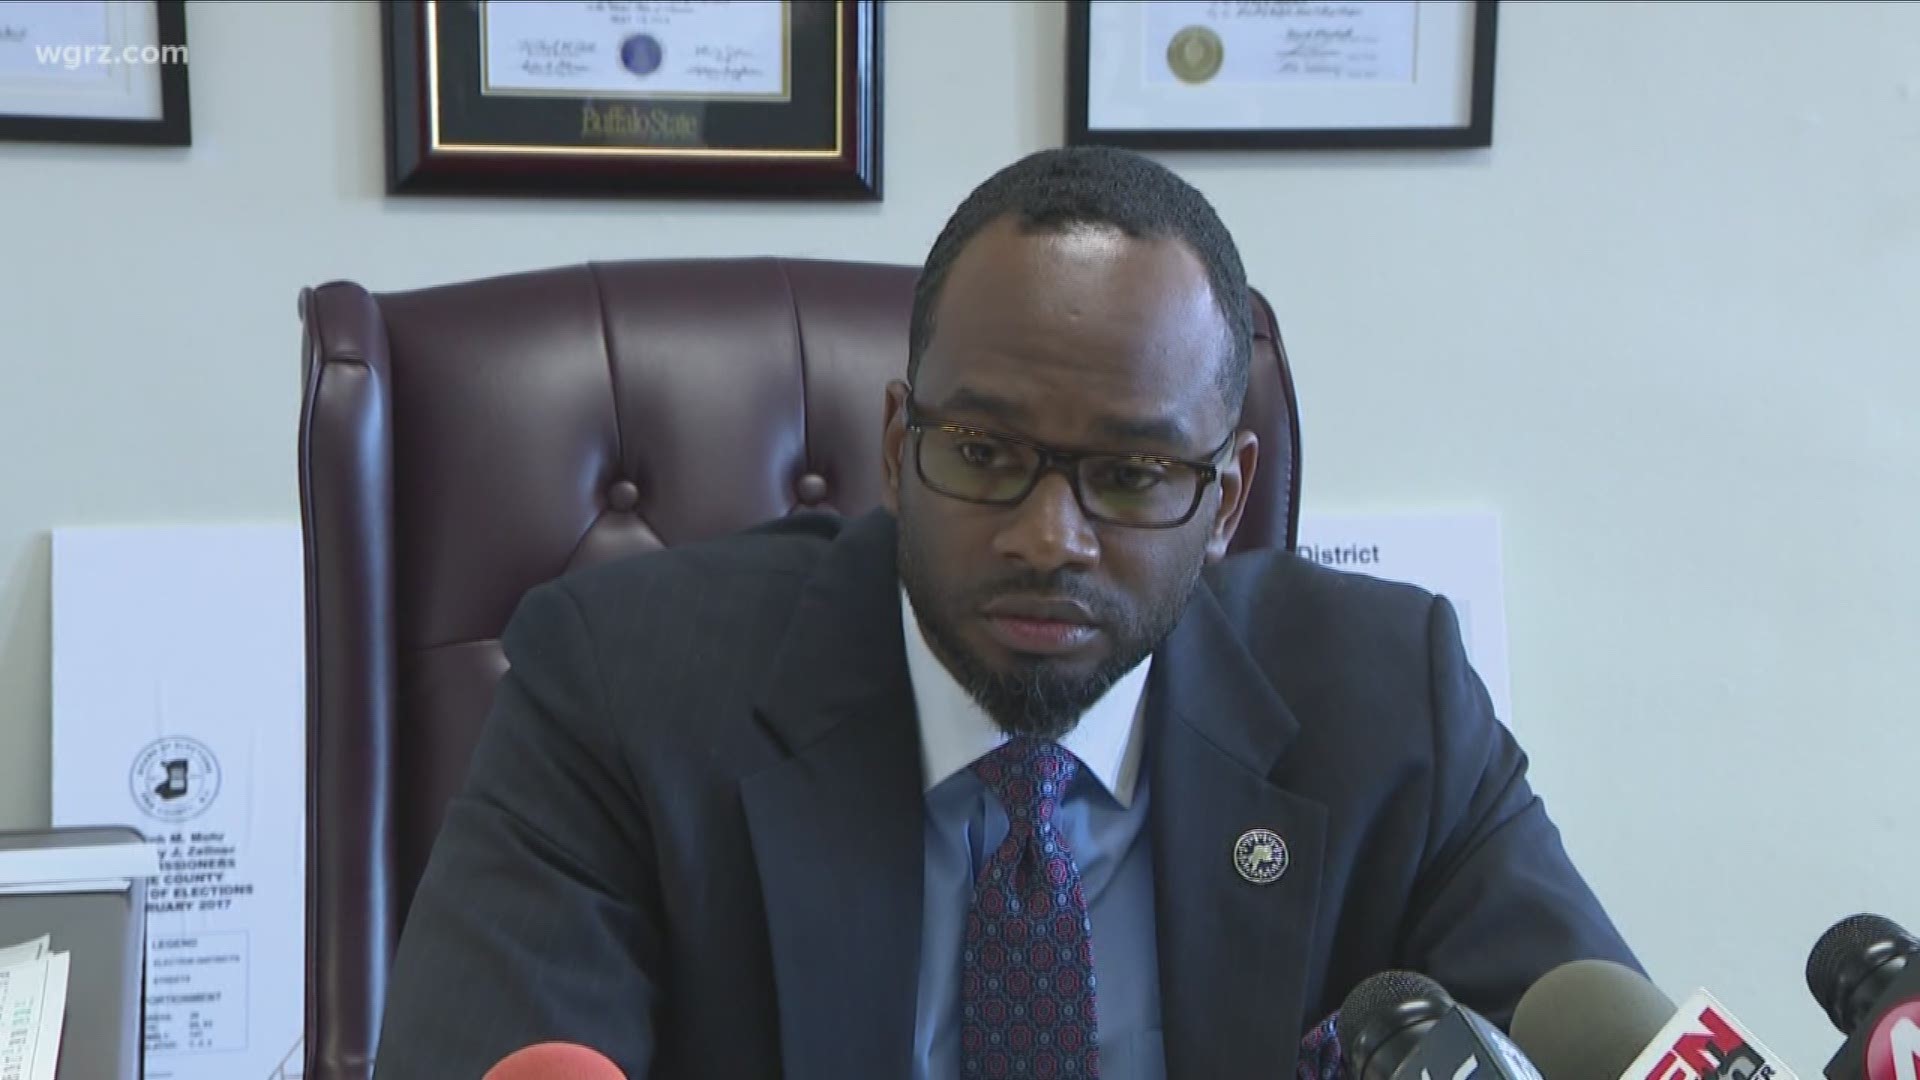 Buffalo Common Council Member Ulysees Wingo refused to get into specifics about the incident at Riverside High two weeks ago involving him bringing his loaded, registered handgun to the school.